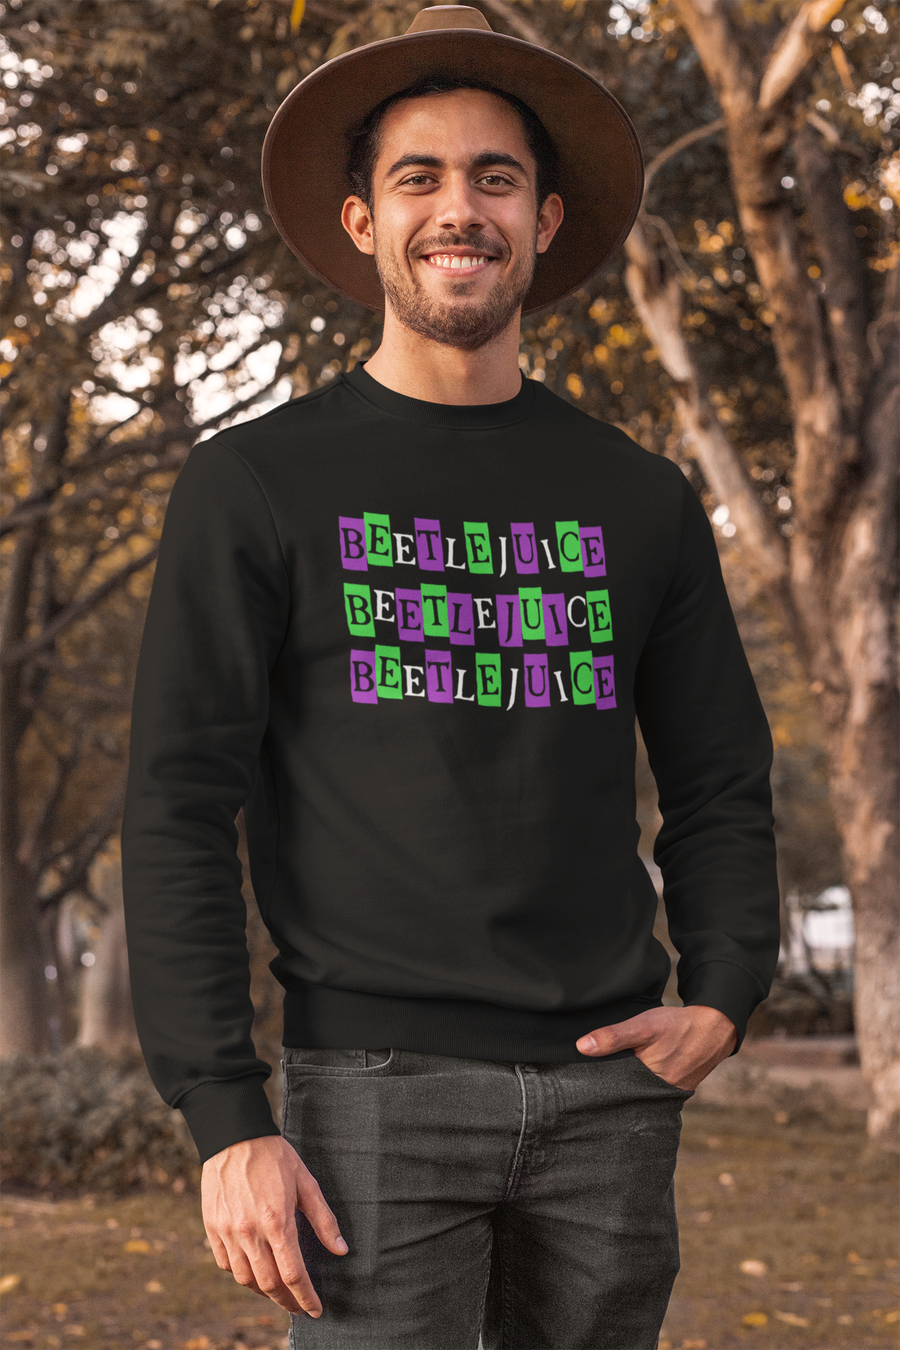 Beetlejuice Beetlejuice Beetlejuice | Crewneck Sweatshirt (Toddler 2T to Adult 5X)